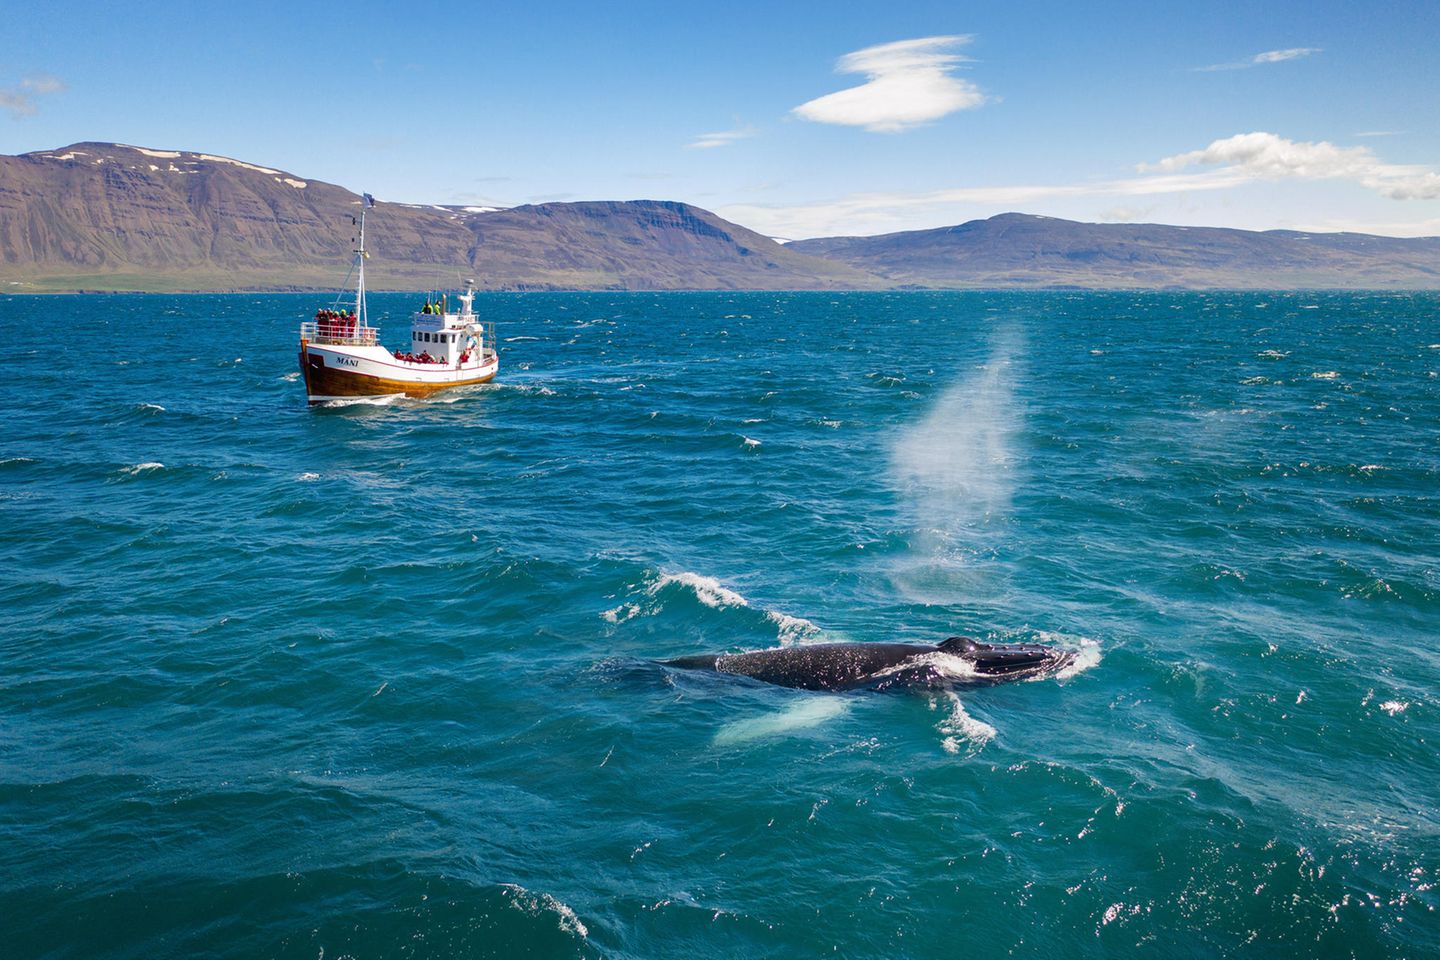 Whale watching has become a billion dollar industry.  Often to the chagrin of whales